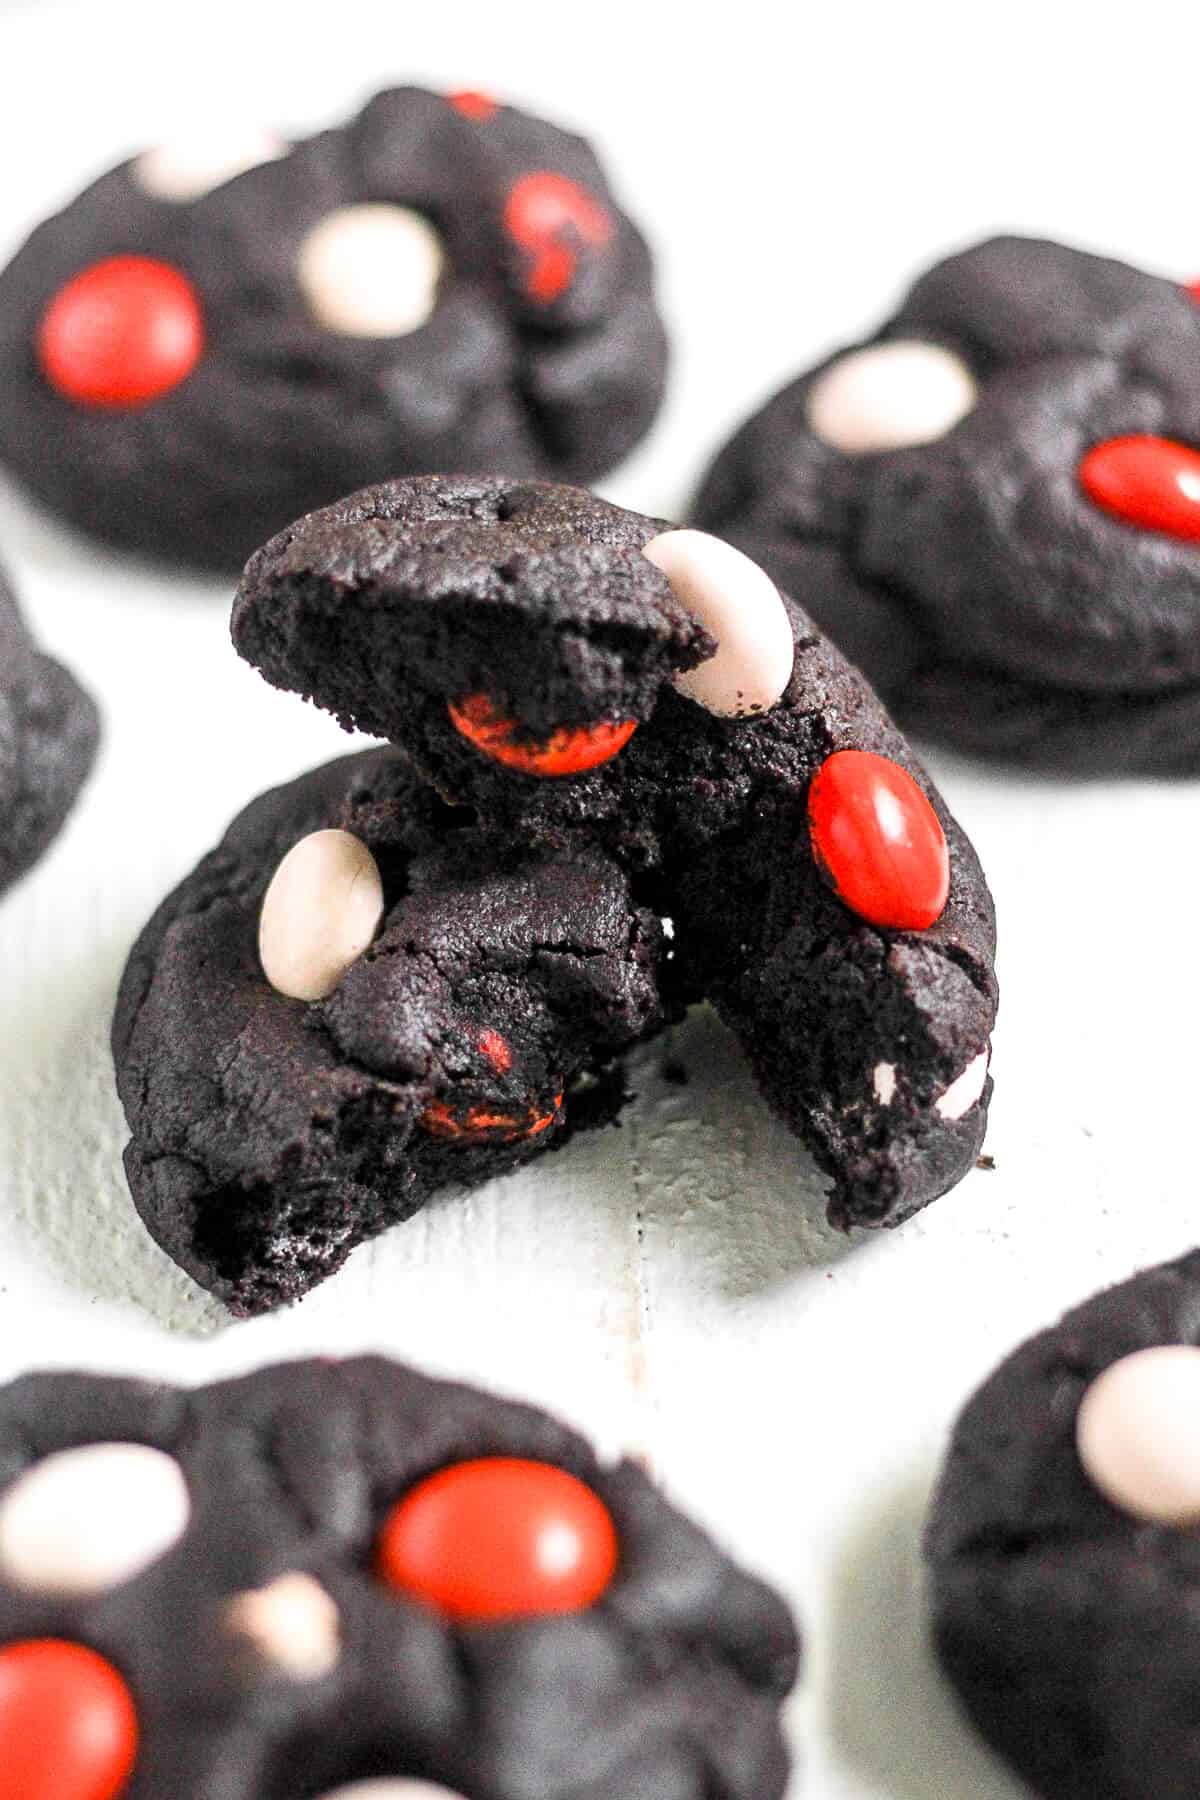 Get ready for your spooky celebration! These Dark Chocolate Halloween Cookies are a great addition to any party spread. They're soft, chewy, filled with chocolate and decorated with festive candy.